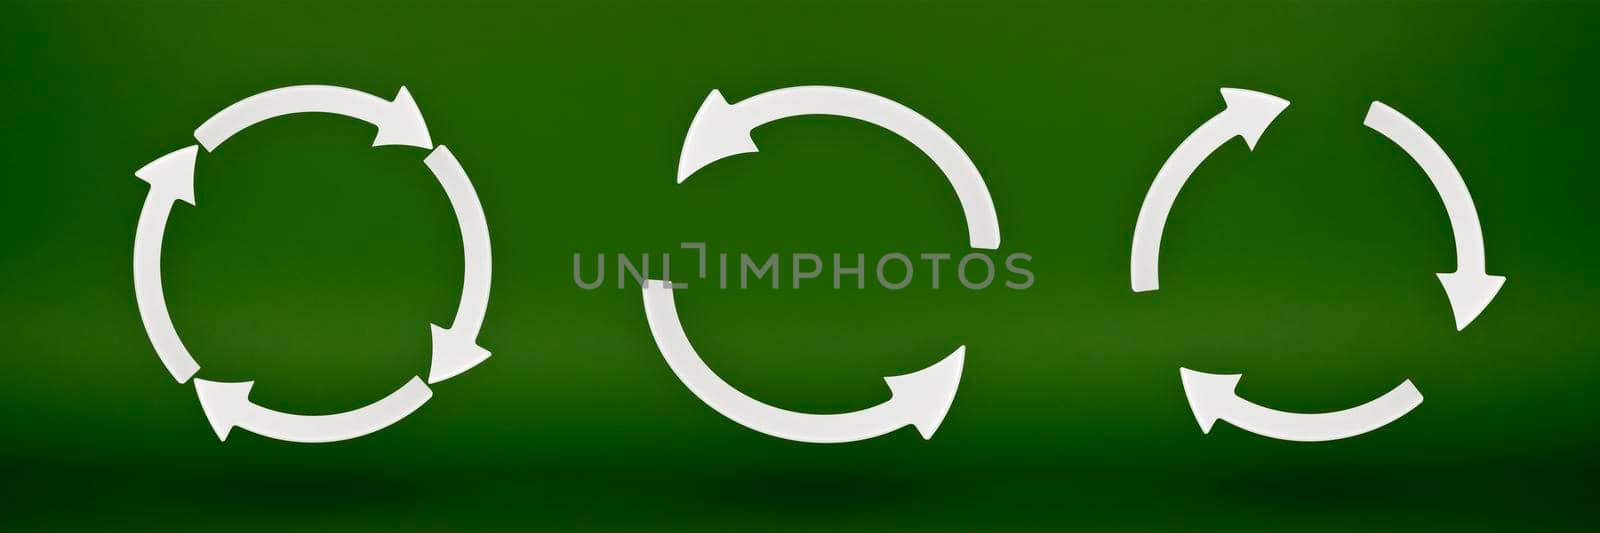 Ecology,set recycling symbol, white arrows form a circle. 3D image on a green background. Green products, green renewable energy, graph pointing up and down by SERSOL